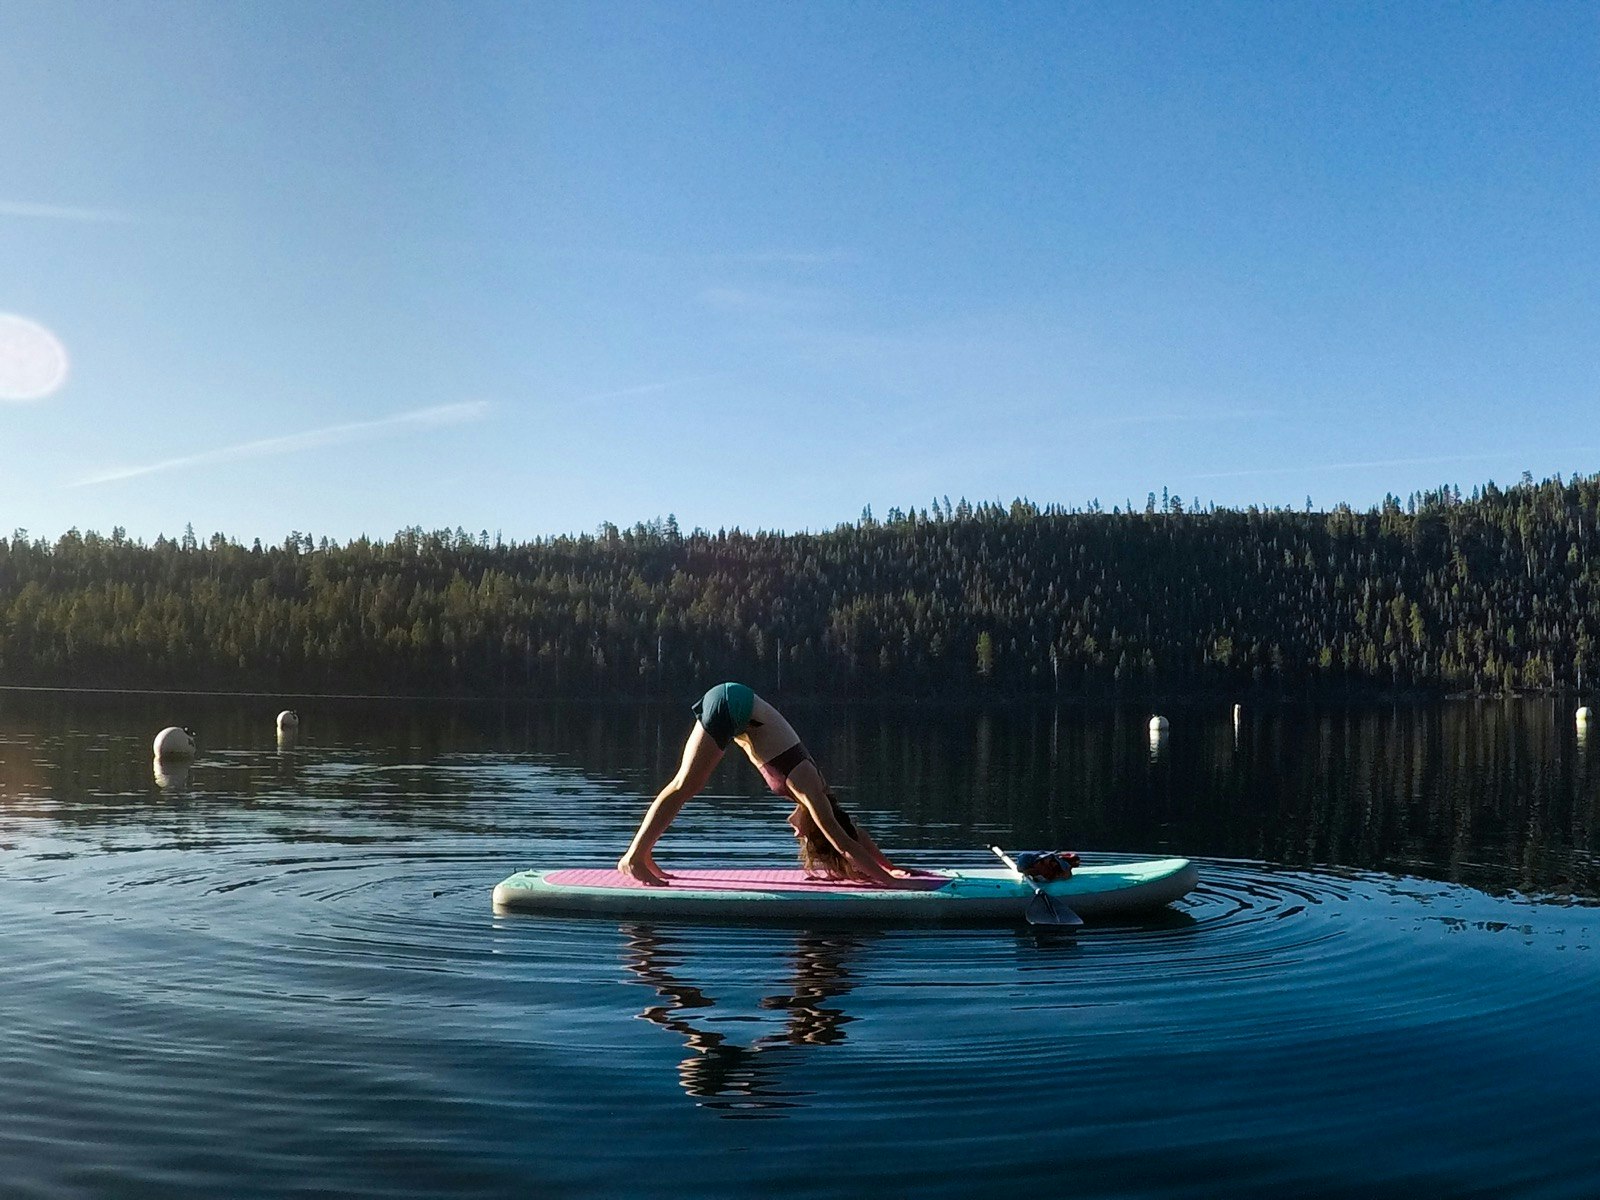 A woman performs the downward facing dog yoga pose on a stand up paddle board in Lake Tahoe